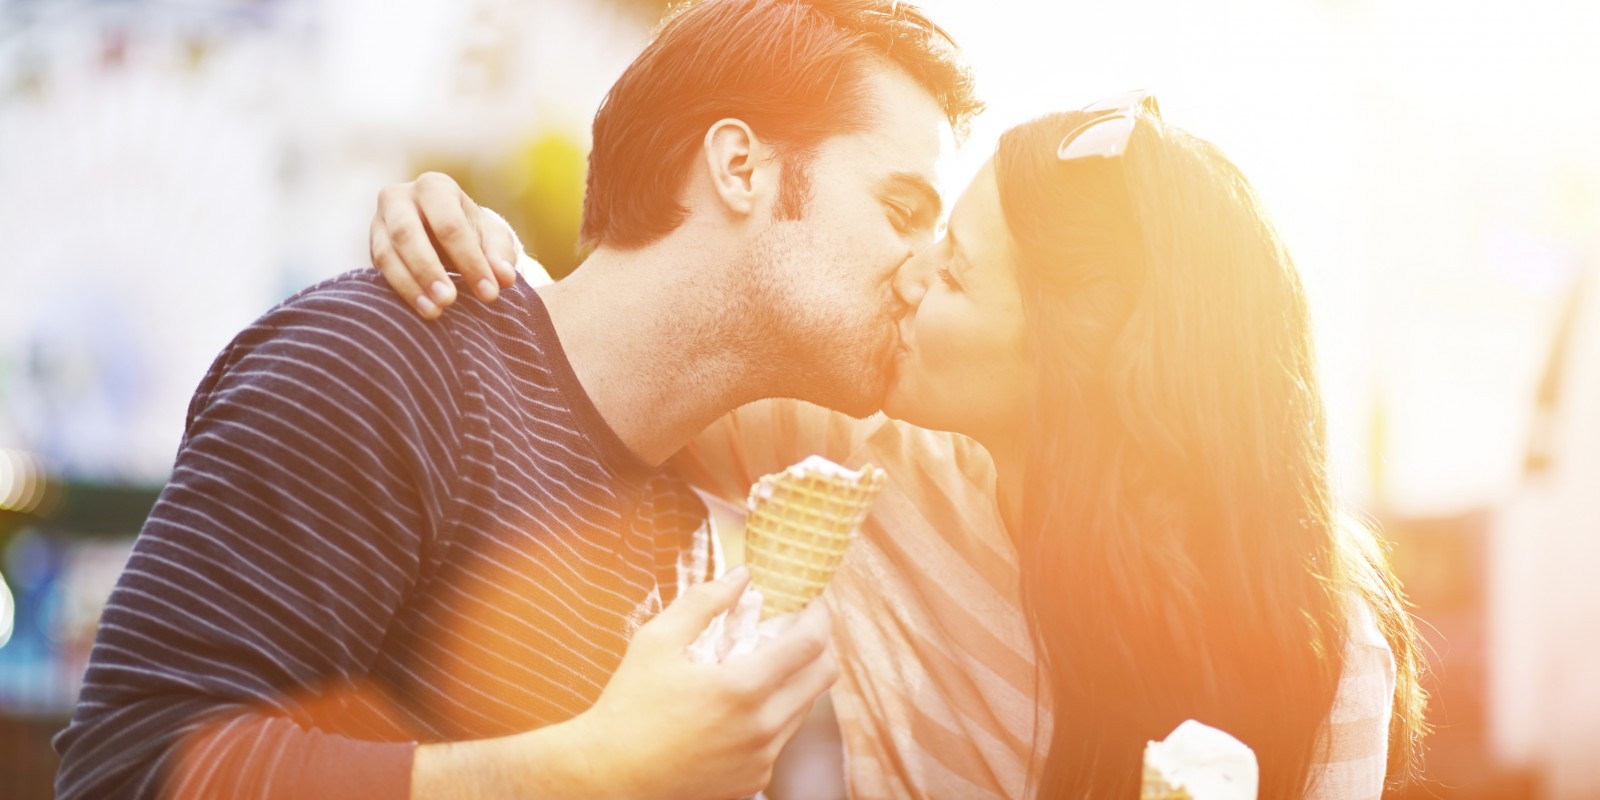 11 Awesome And Perfect Tips For How To Kiss A Girl